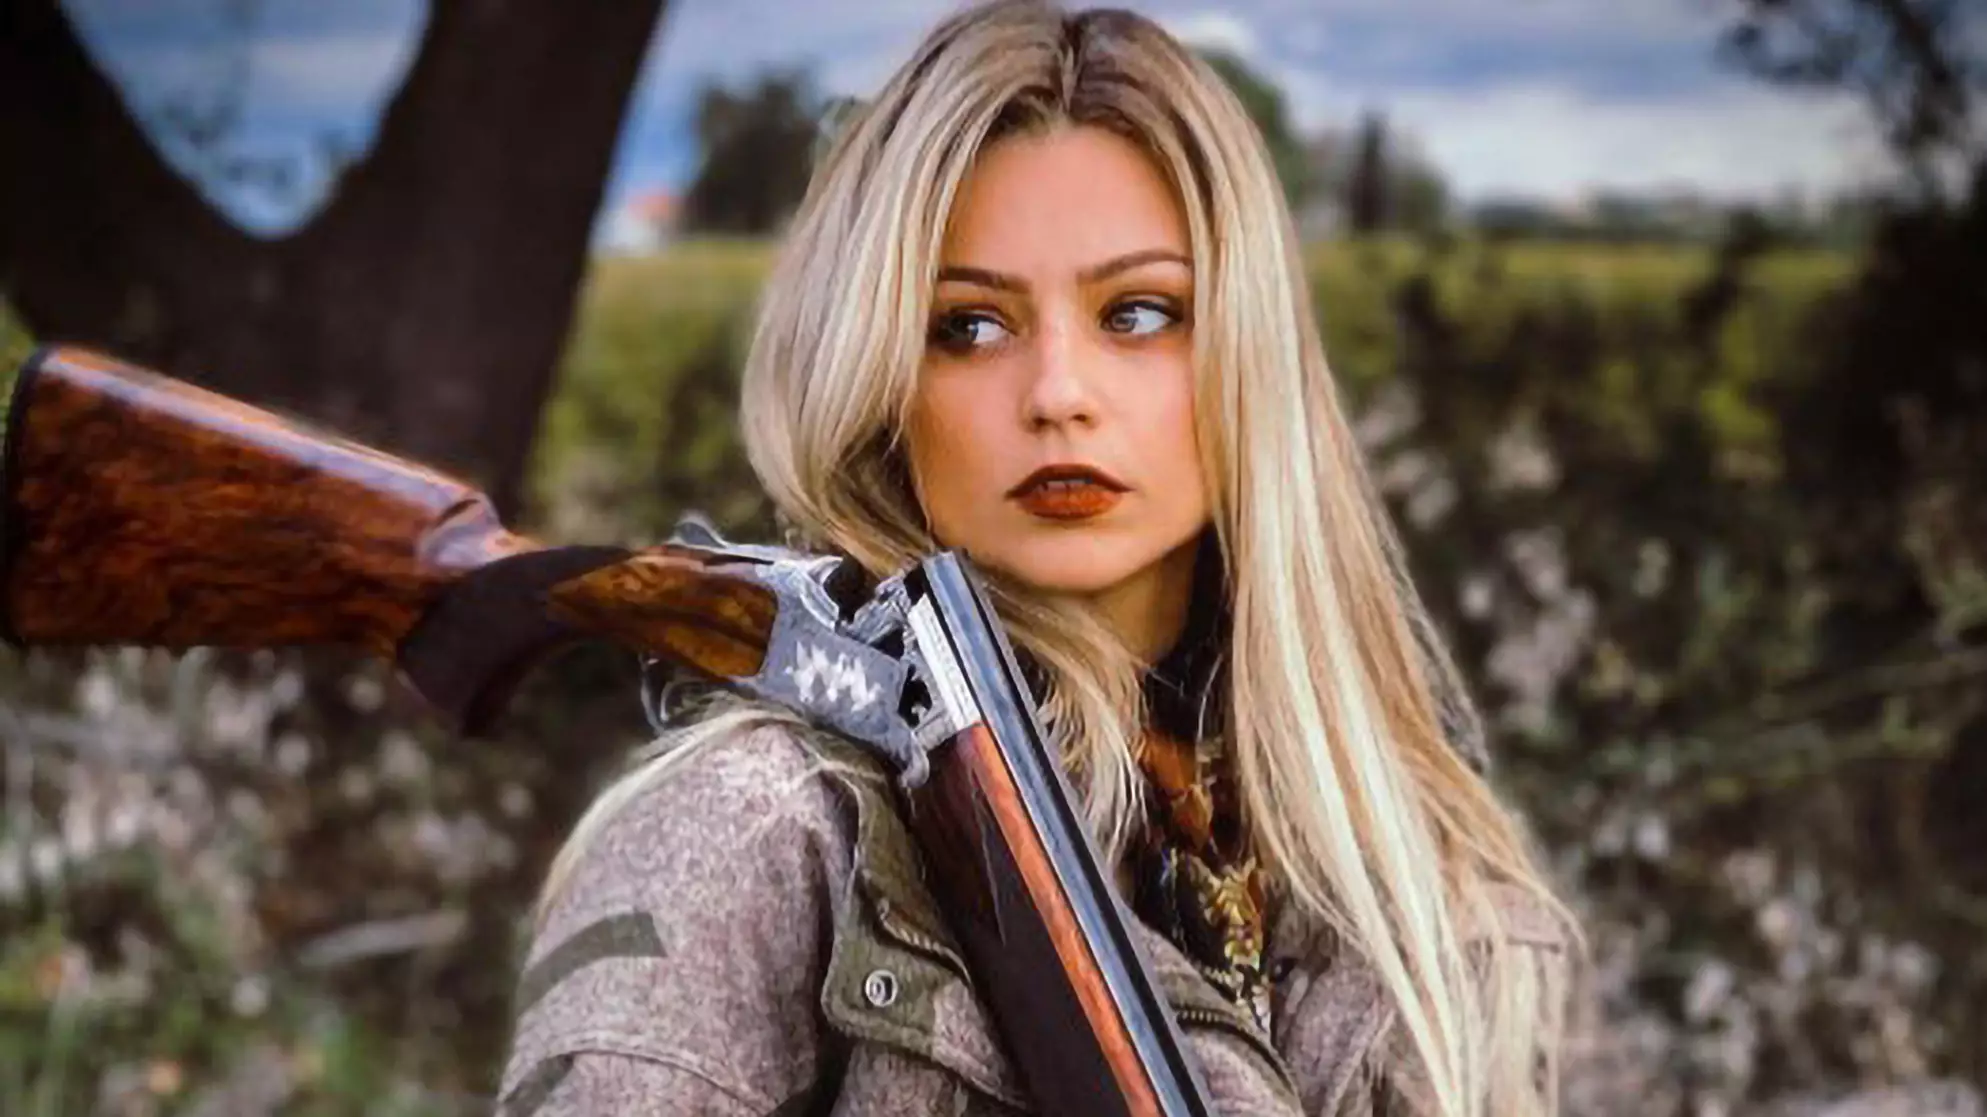 Female Hunter Receives Death Threats For Posing With Her Kills 